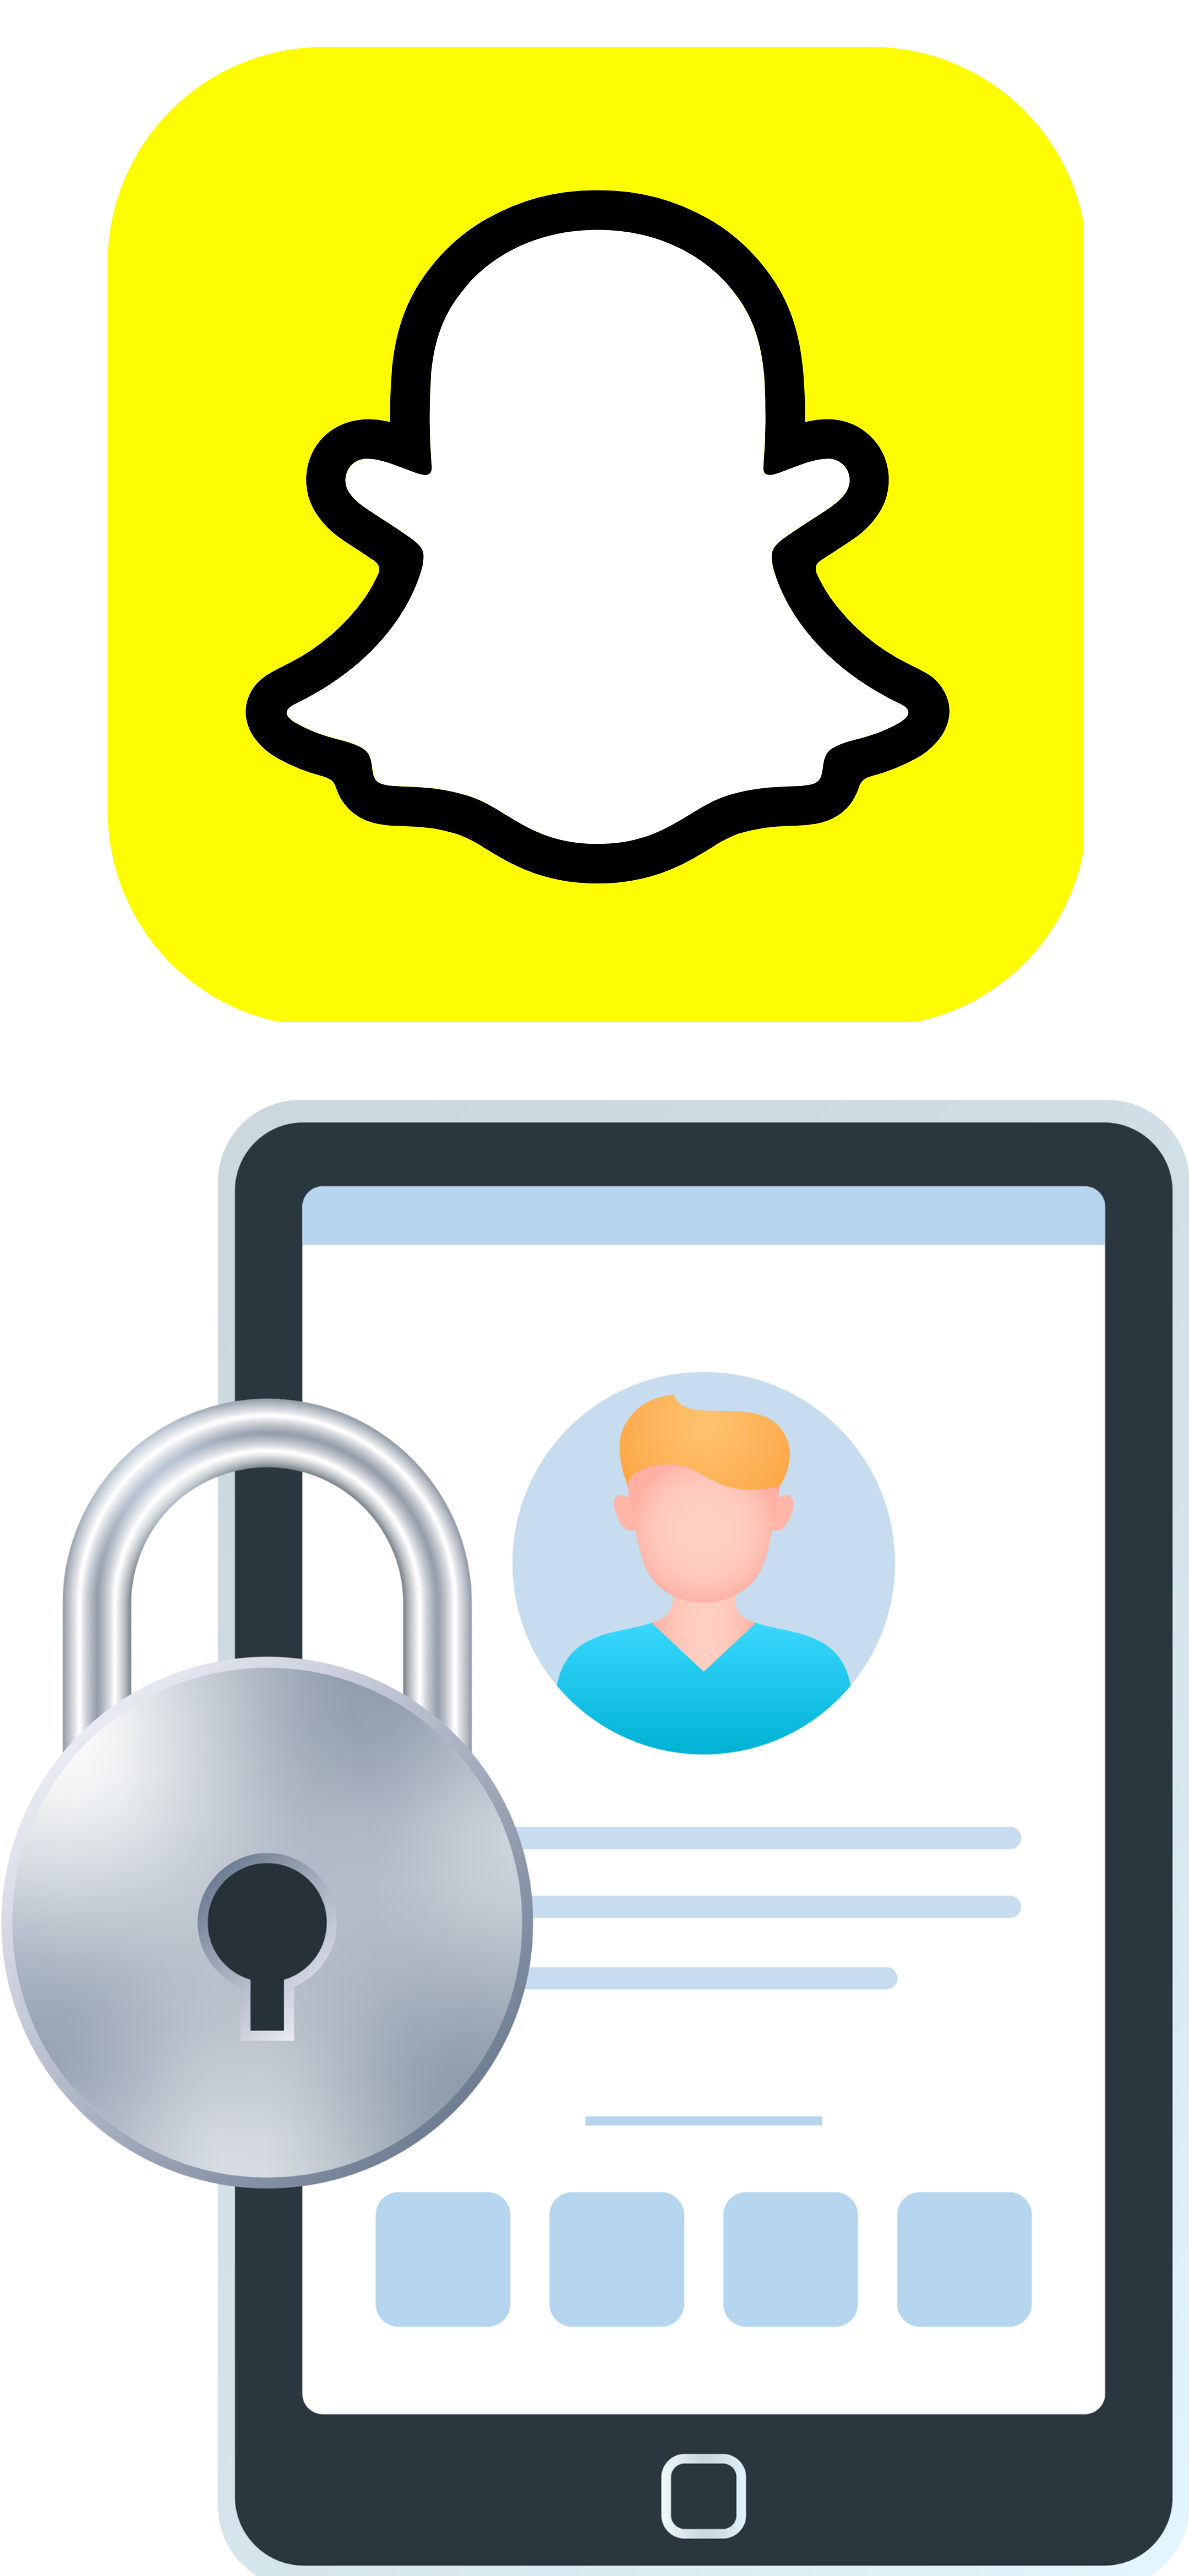 An image showcasing the Snapchat logo over a secure lock.